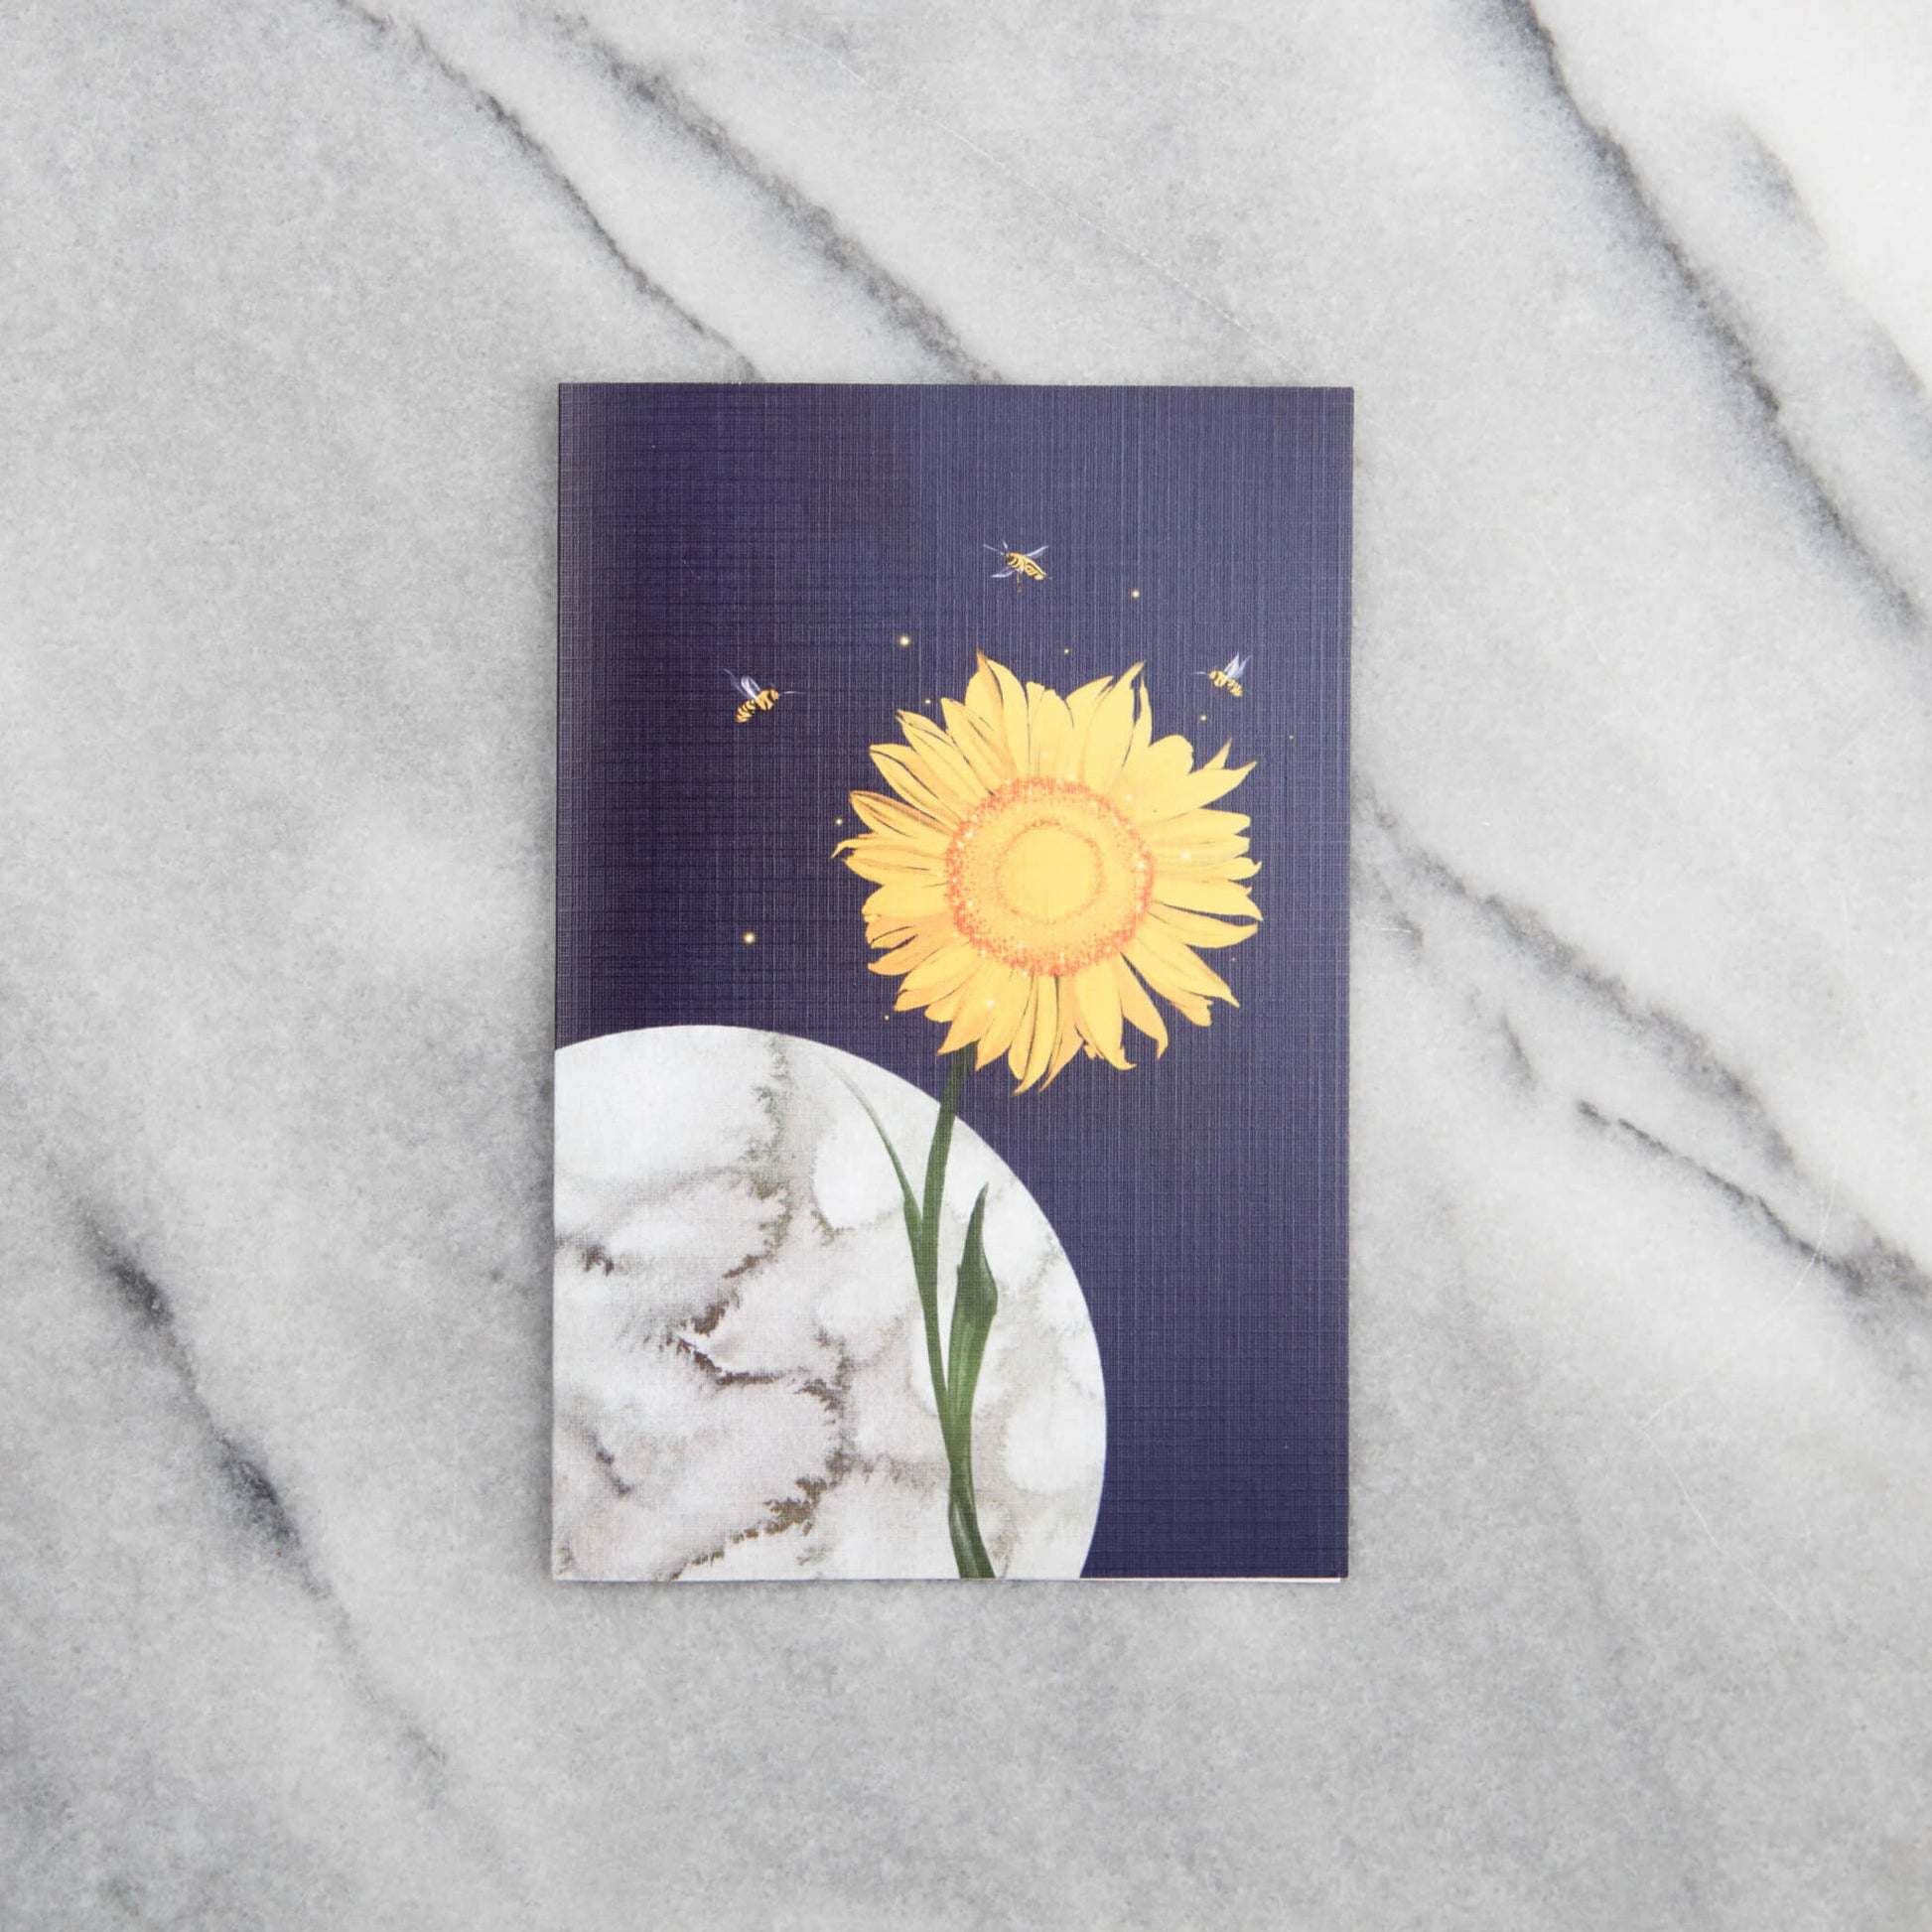 Greeting card with sunflower and honeybees on blue background